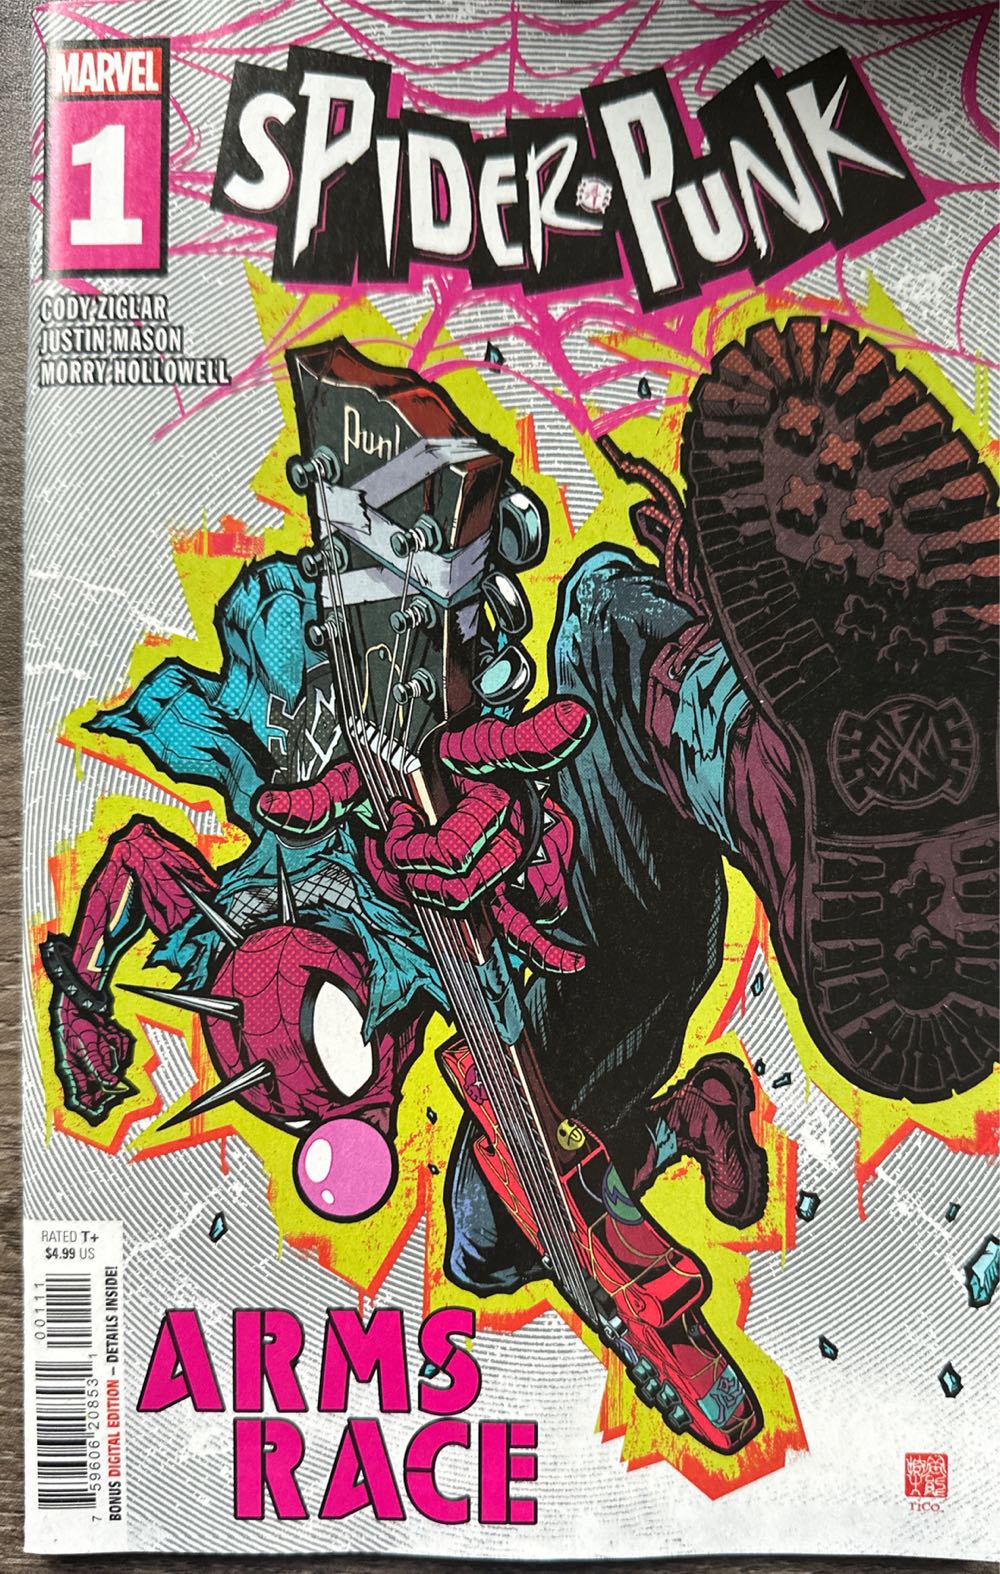 Arms Race #1 Variant Spider Punk: Punk 1 - Marvel Comics (1 - Feb 2024) comic book collectible [Barcode 75960620853100111] - Main Image 1